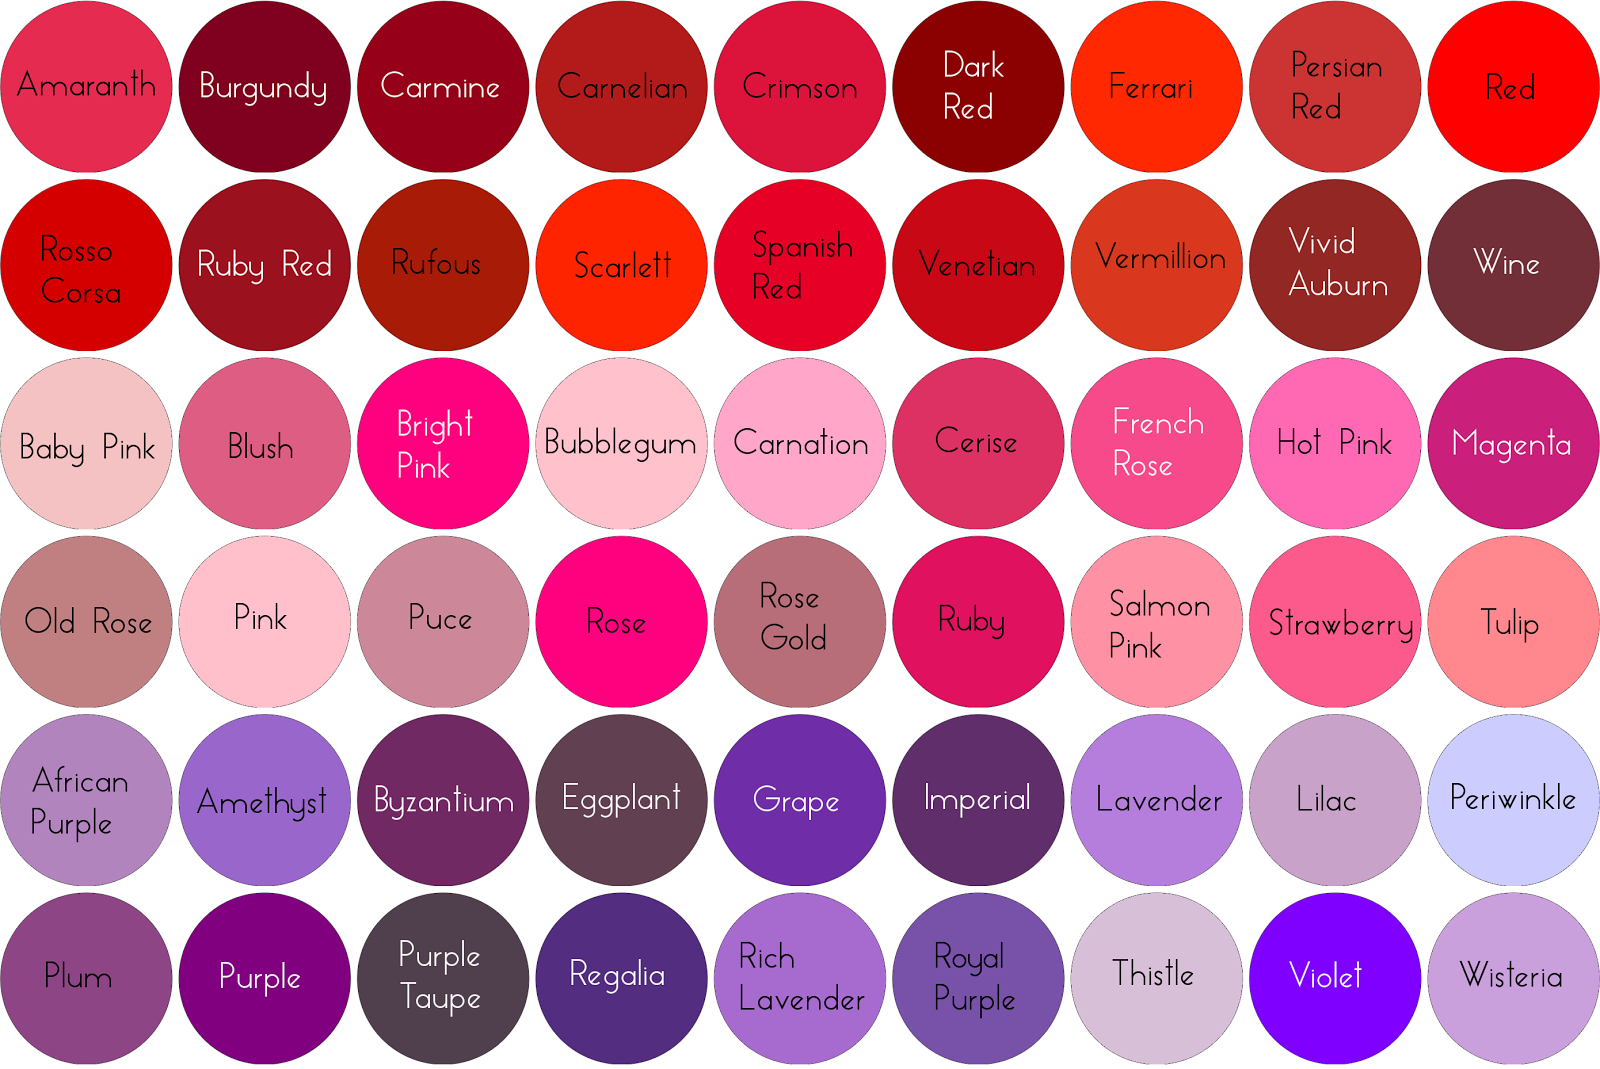 image result for red hair color shades chart red hair color shades ...